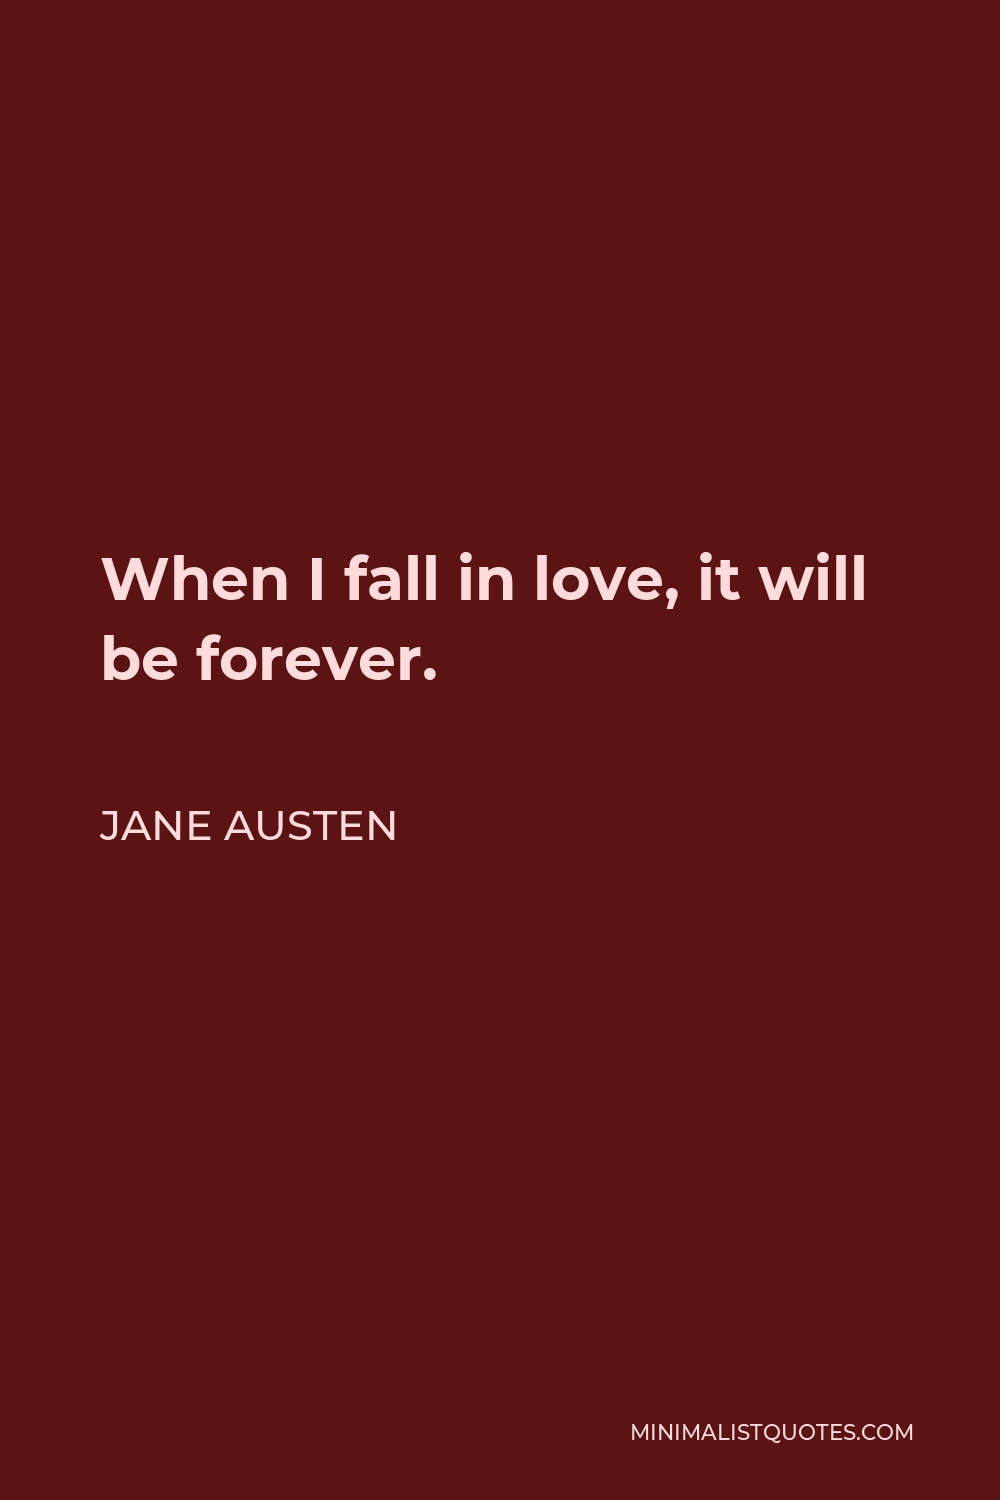 Jane Austen Quote - When I fall in love, it will be forever.